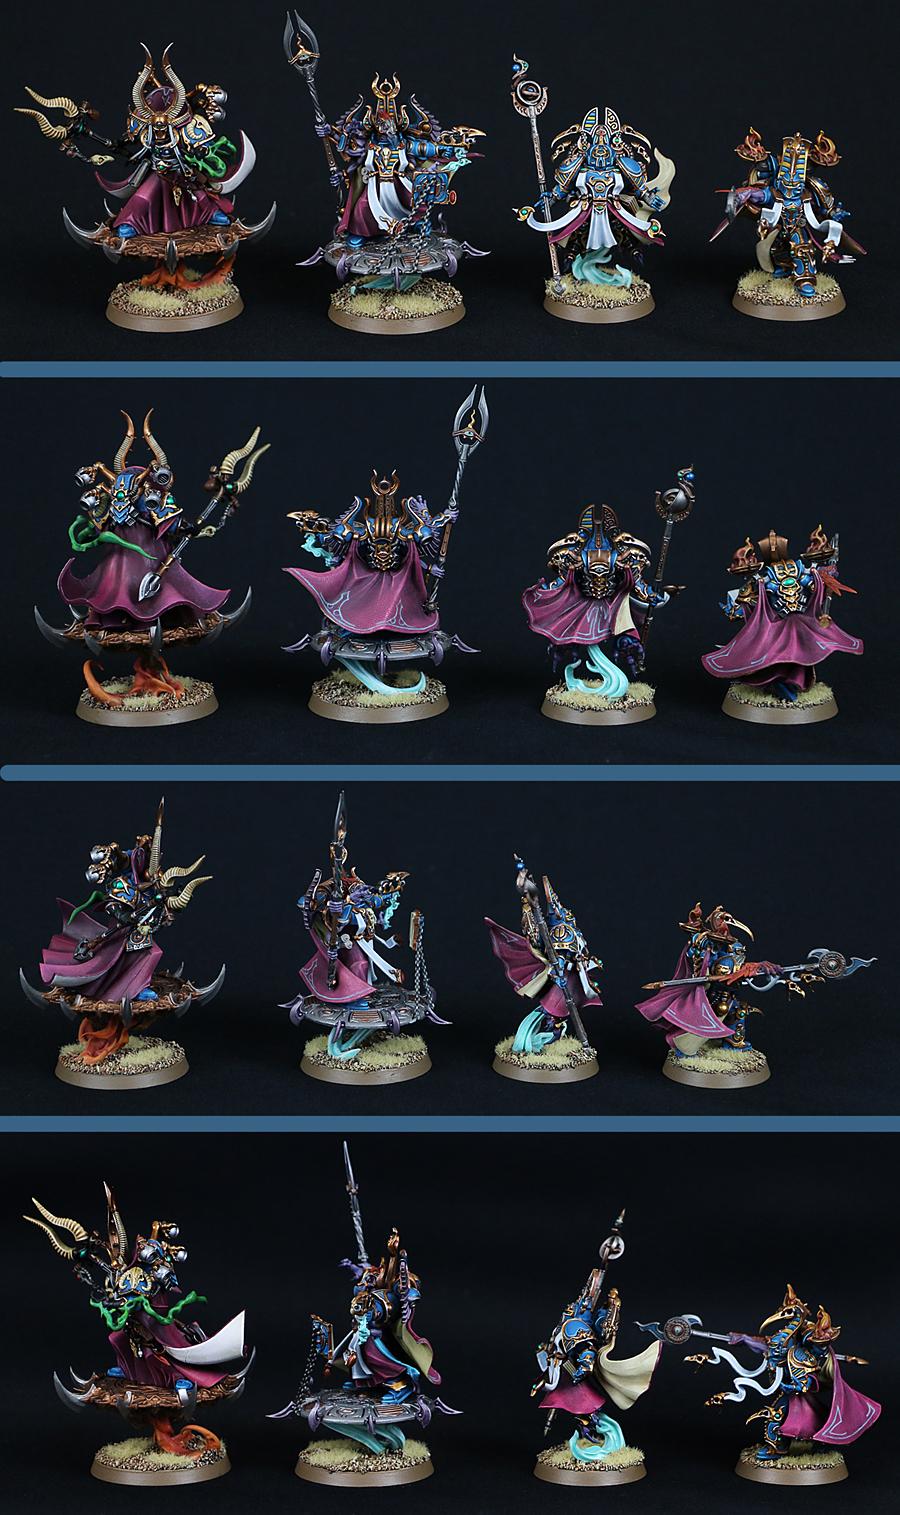 Ahriman, Chaos Space Marines, Exalted Sorcerers, Thousand Sons